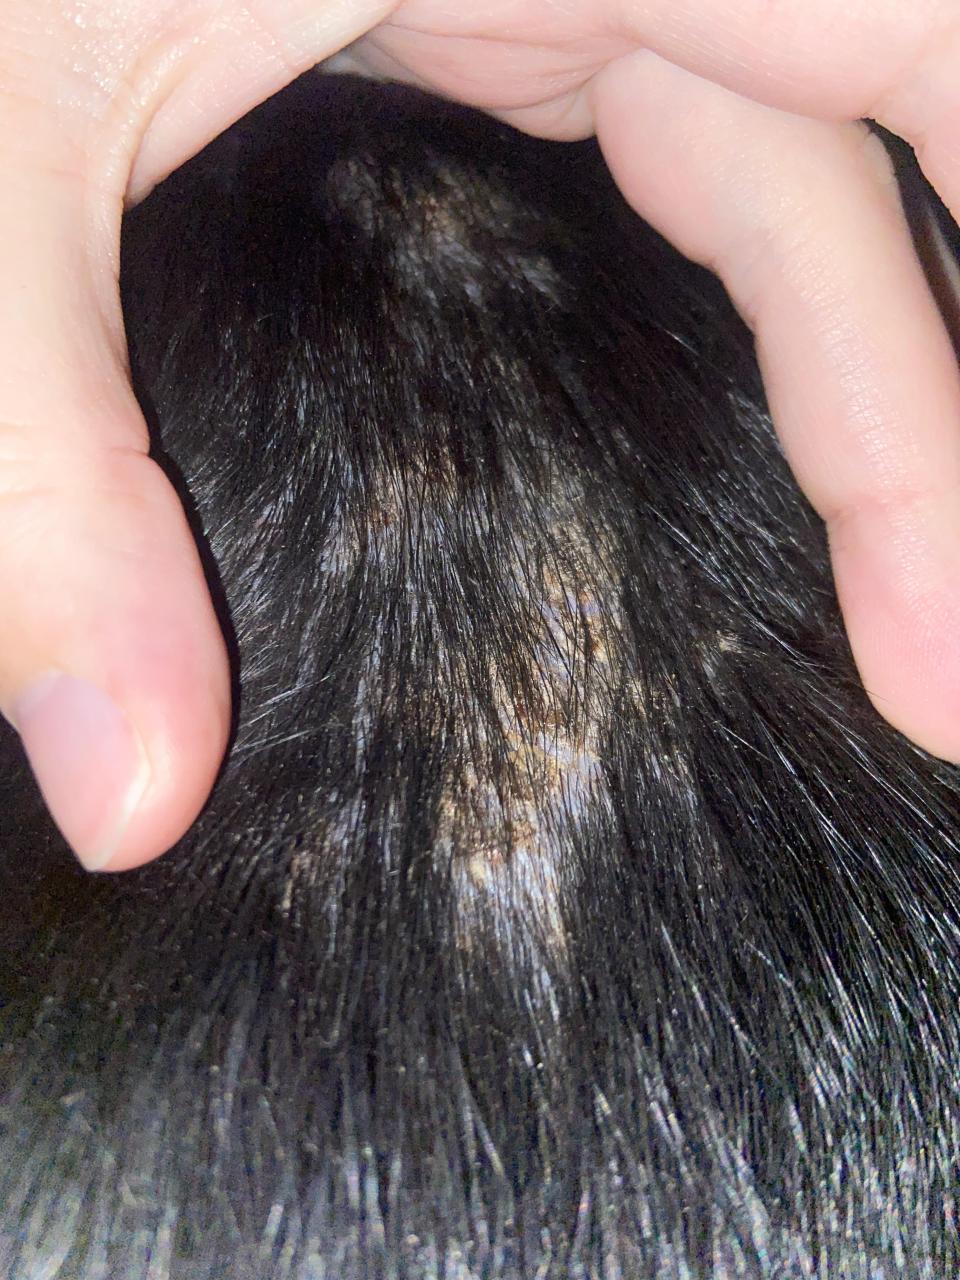 Dog Losing Hair/Spreading Scab. Help? : R/Dogallergies